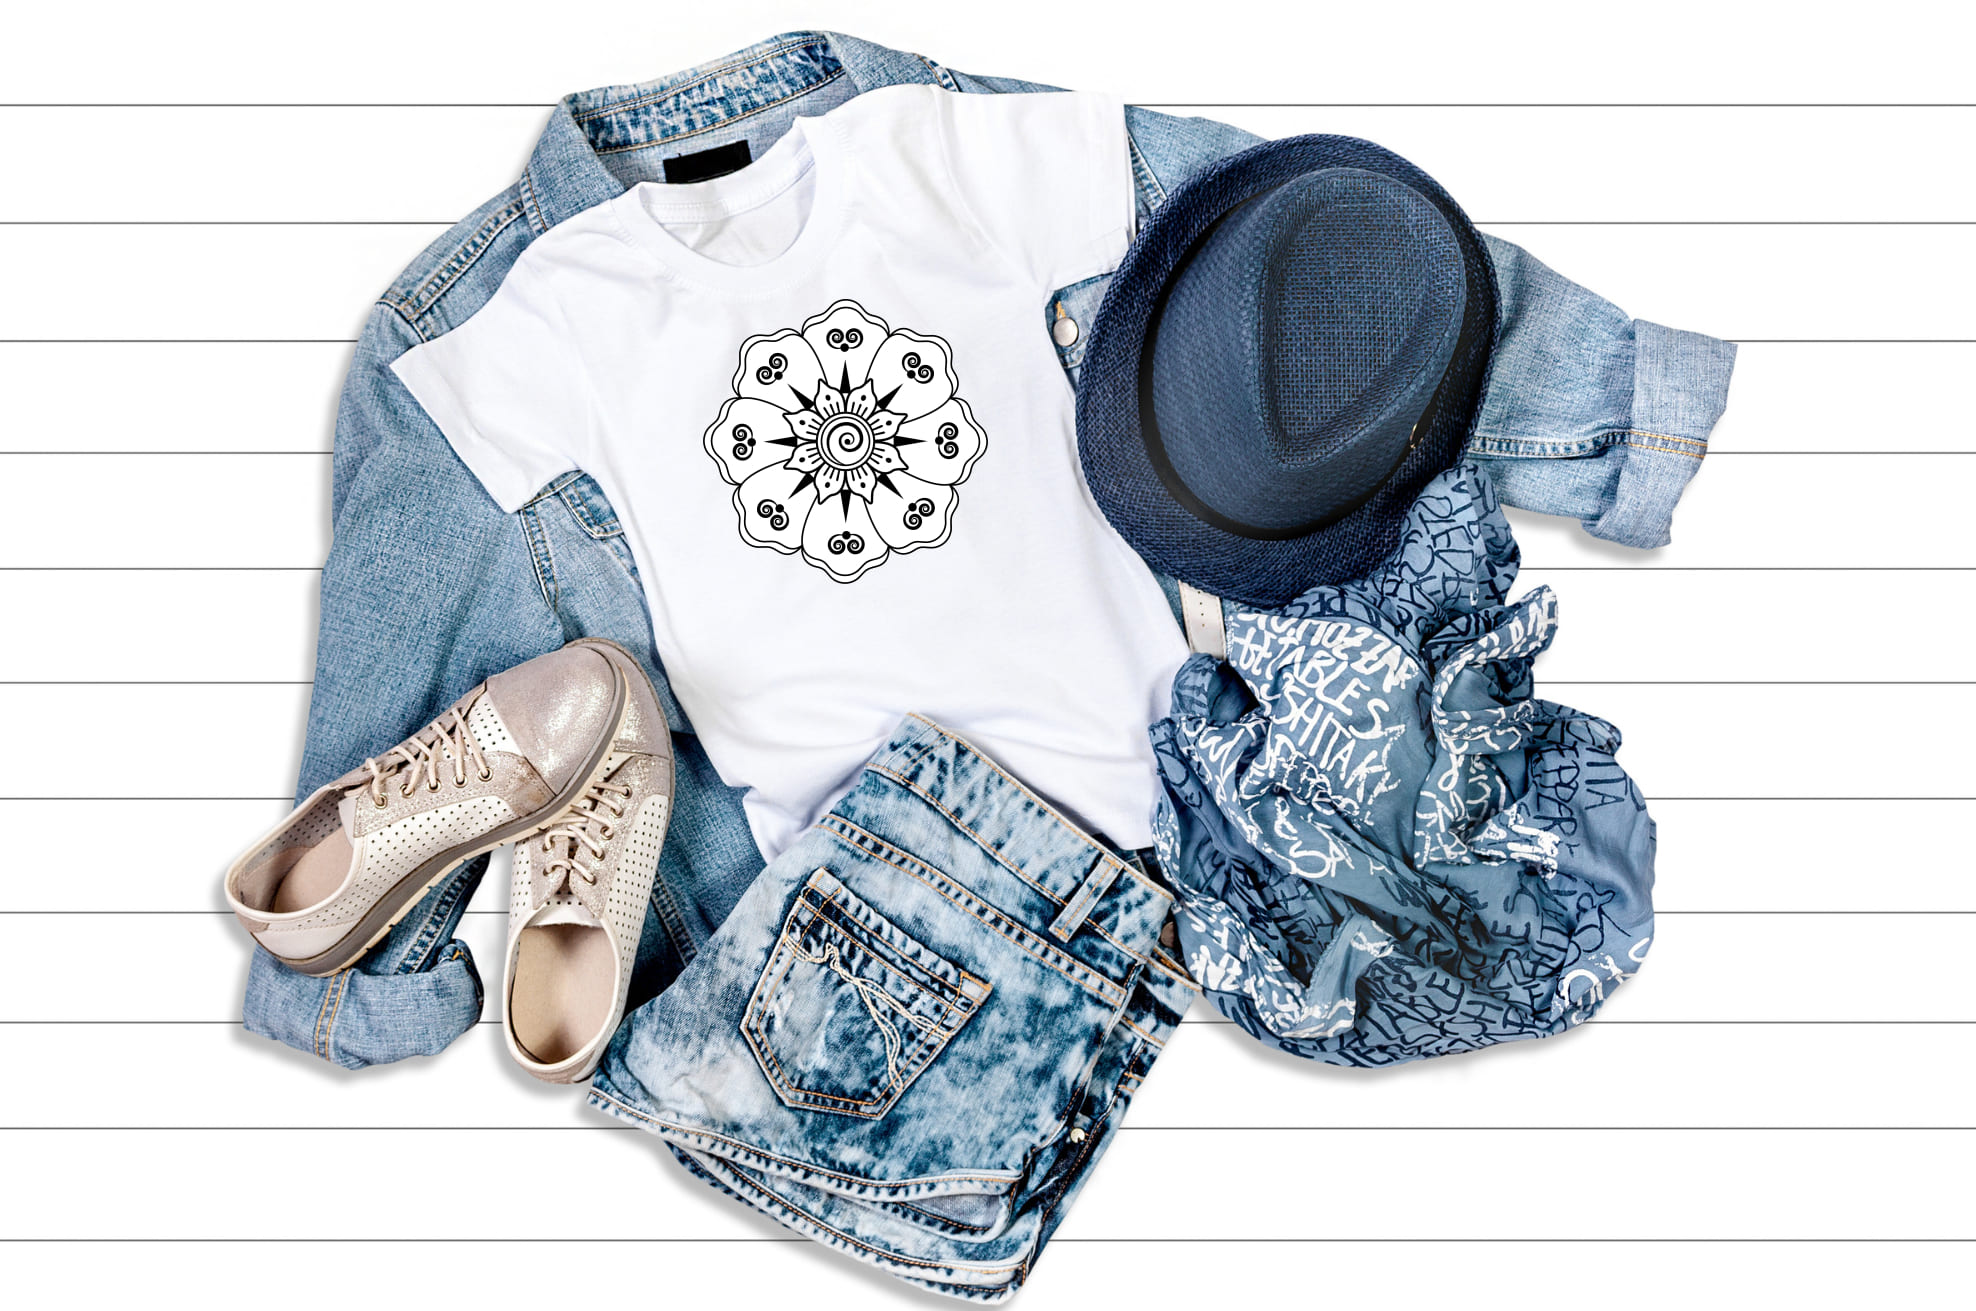 Jeans look with the white t-shirt with a mandala illustration.